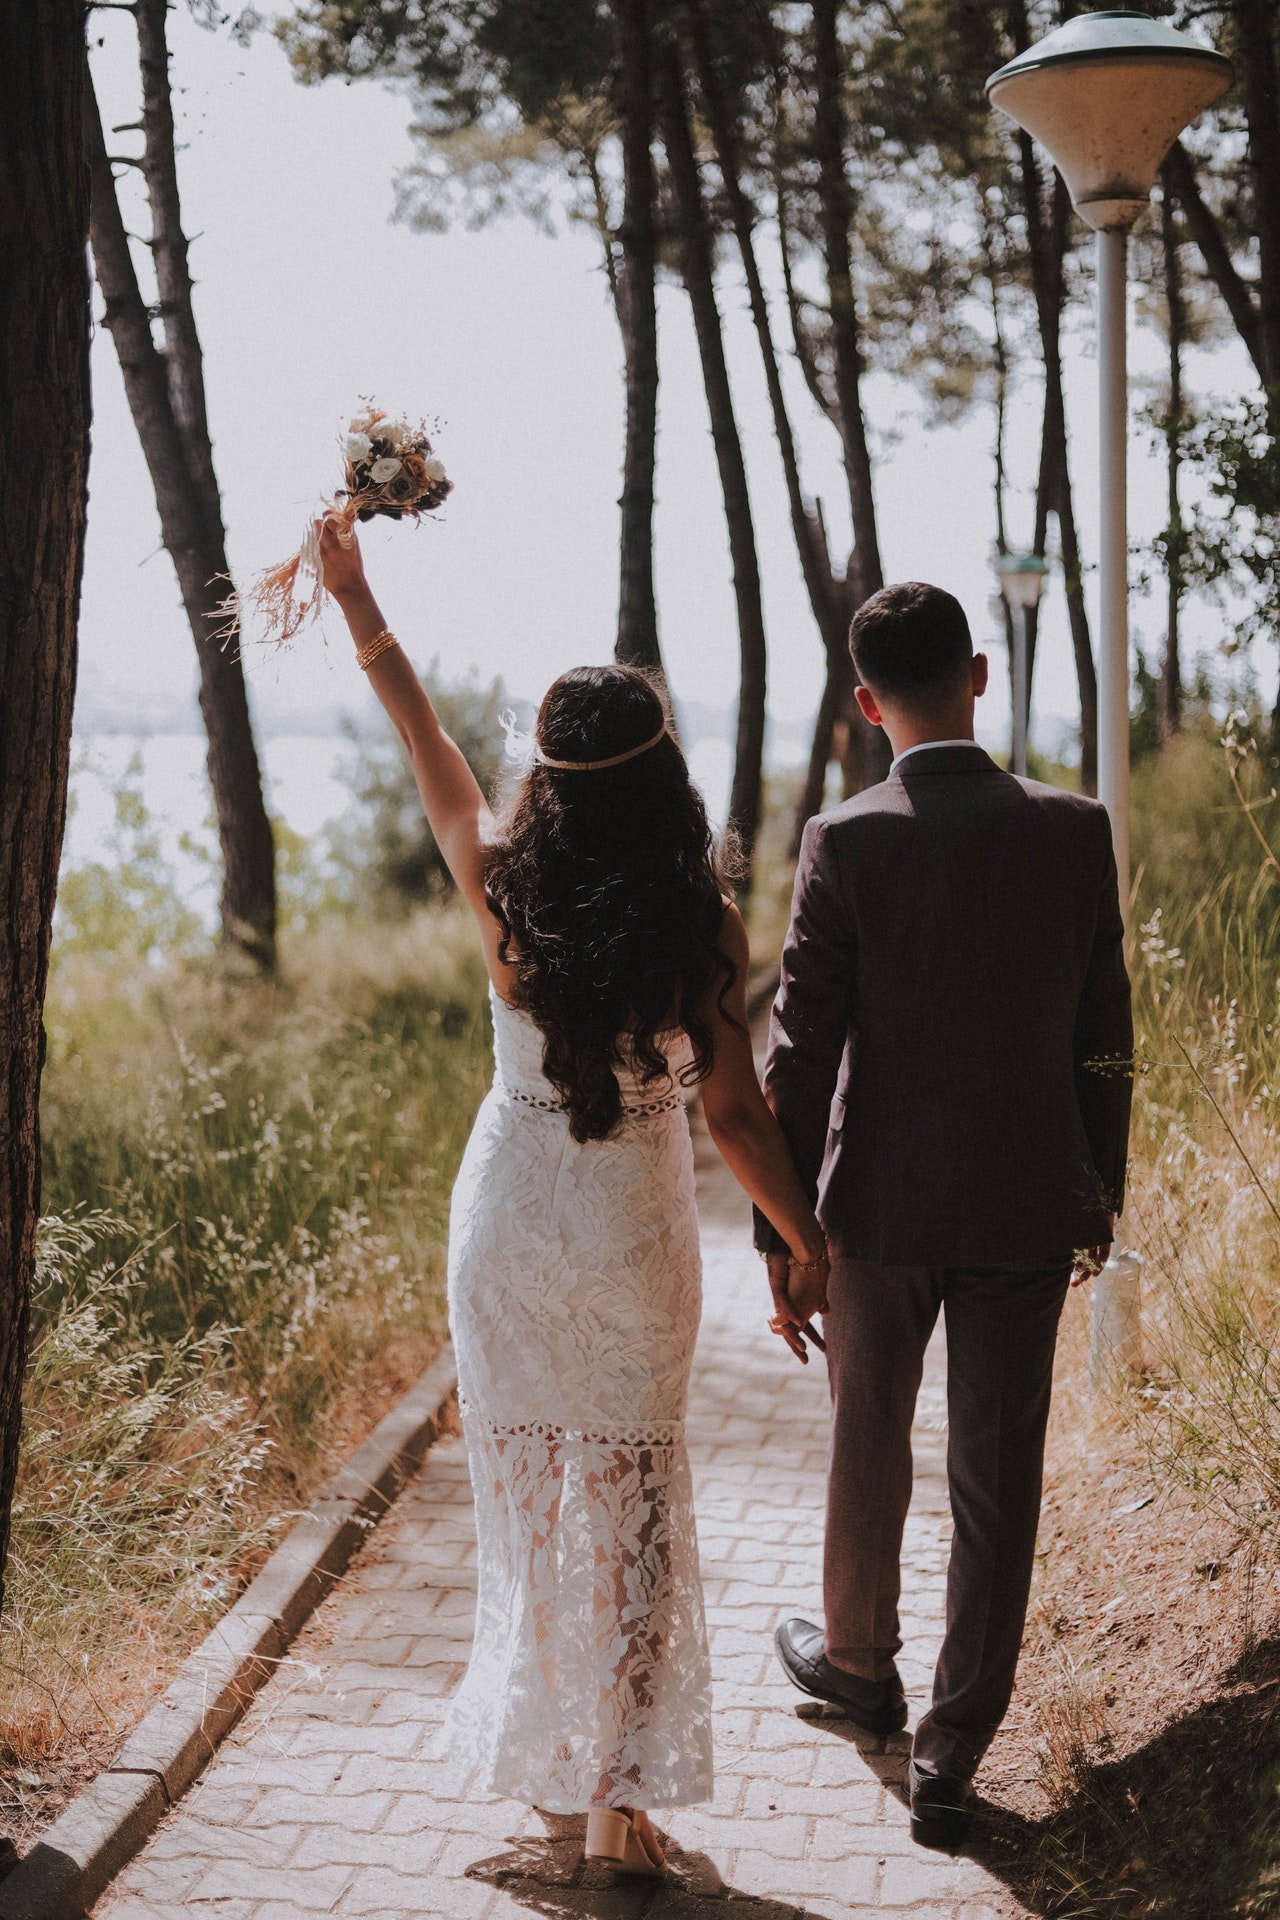 A couple walking in the woods in their wedding outfits. | Photo: Pexels